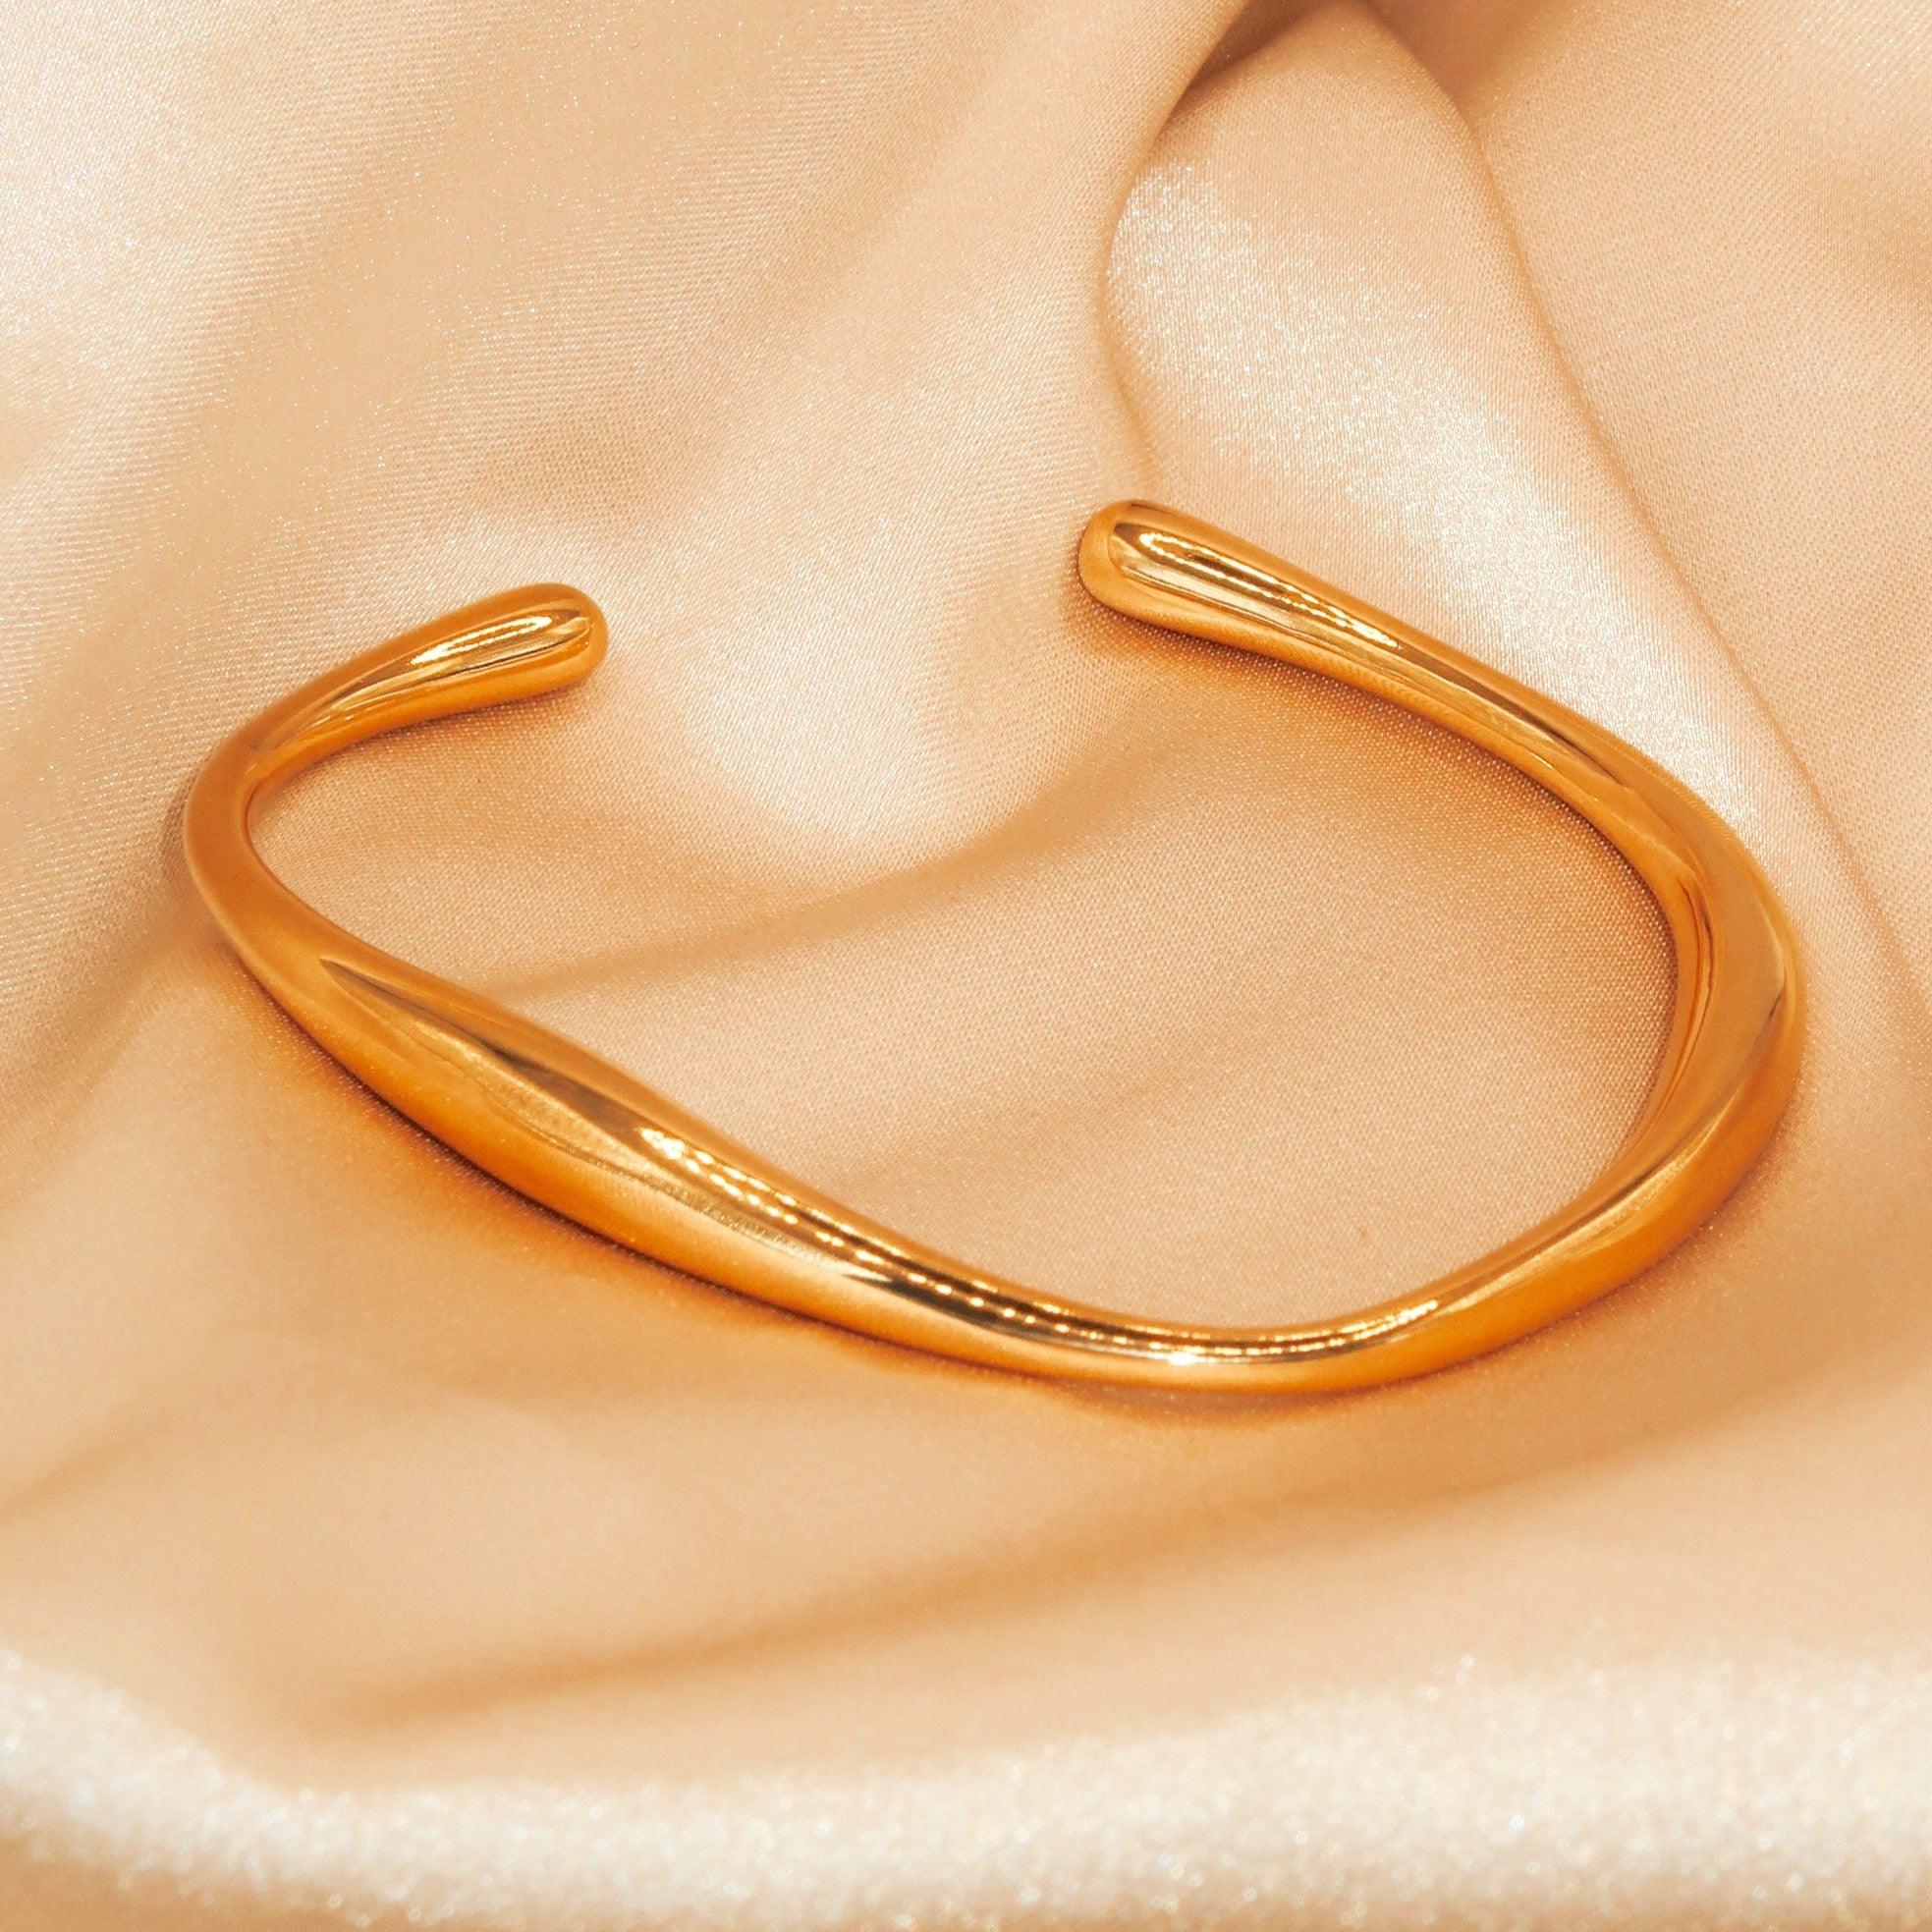 ALESSANDRA - 18K PVD Gold Plated Stackable Cuff Bracelet - Mixed Metals